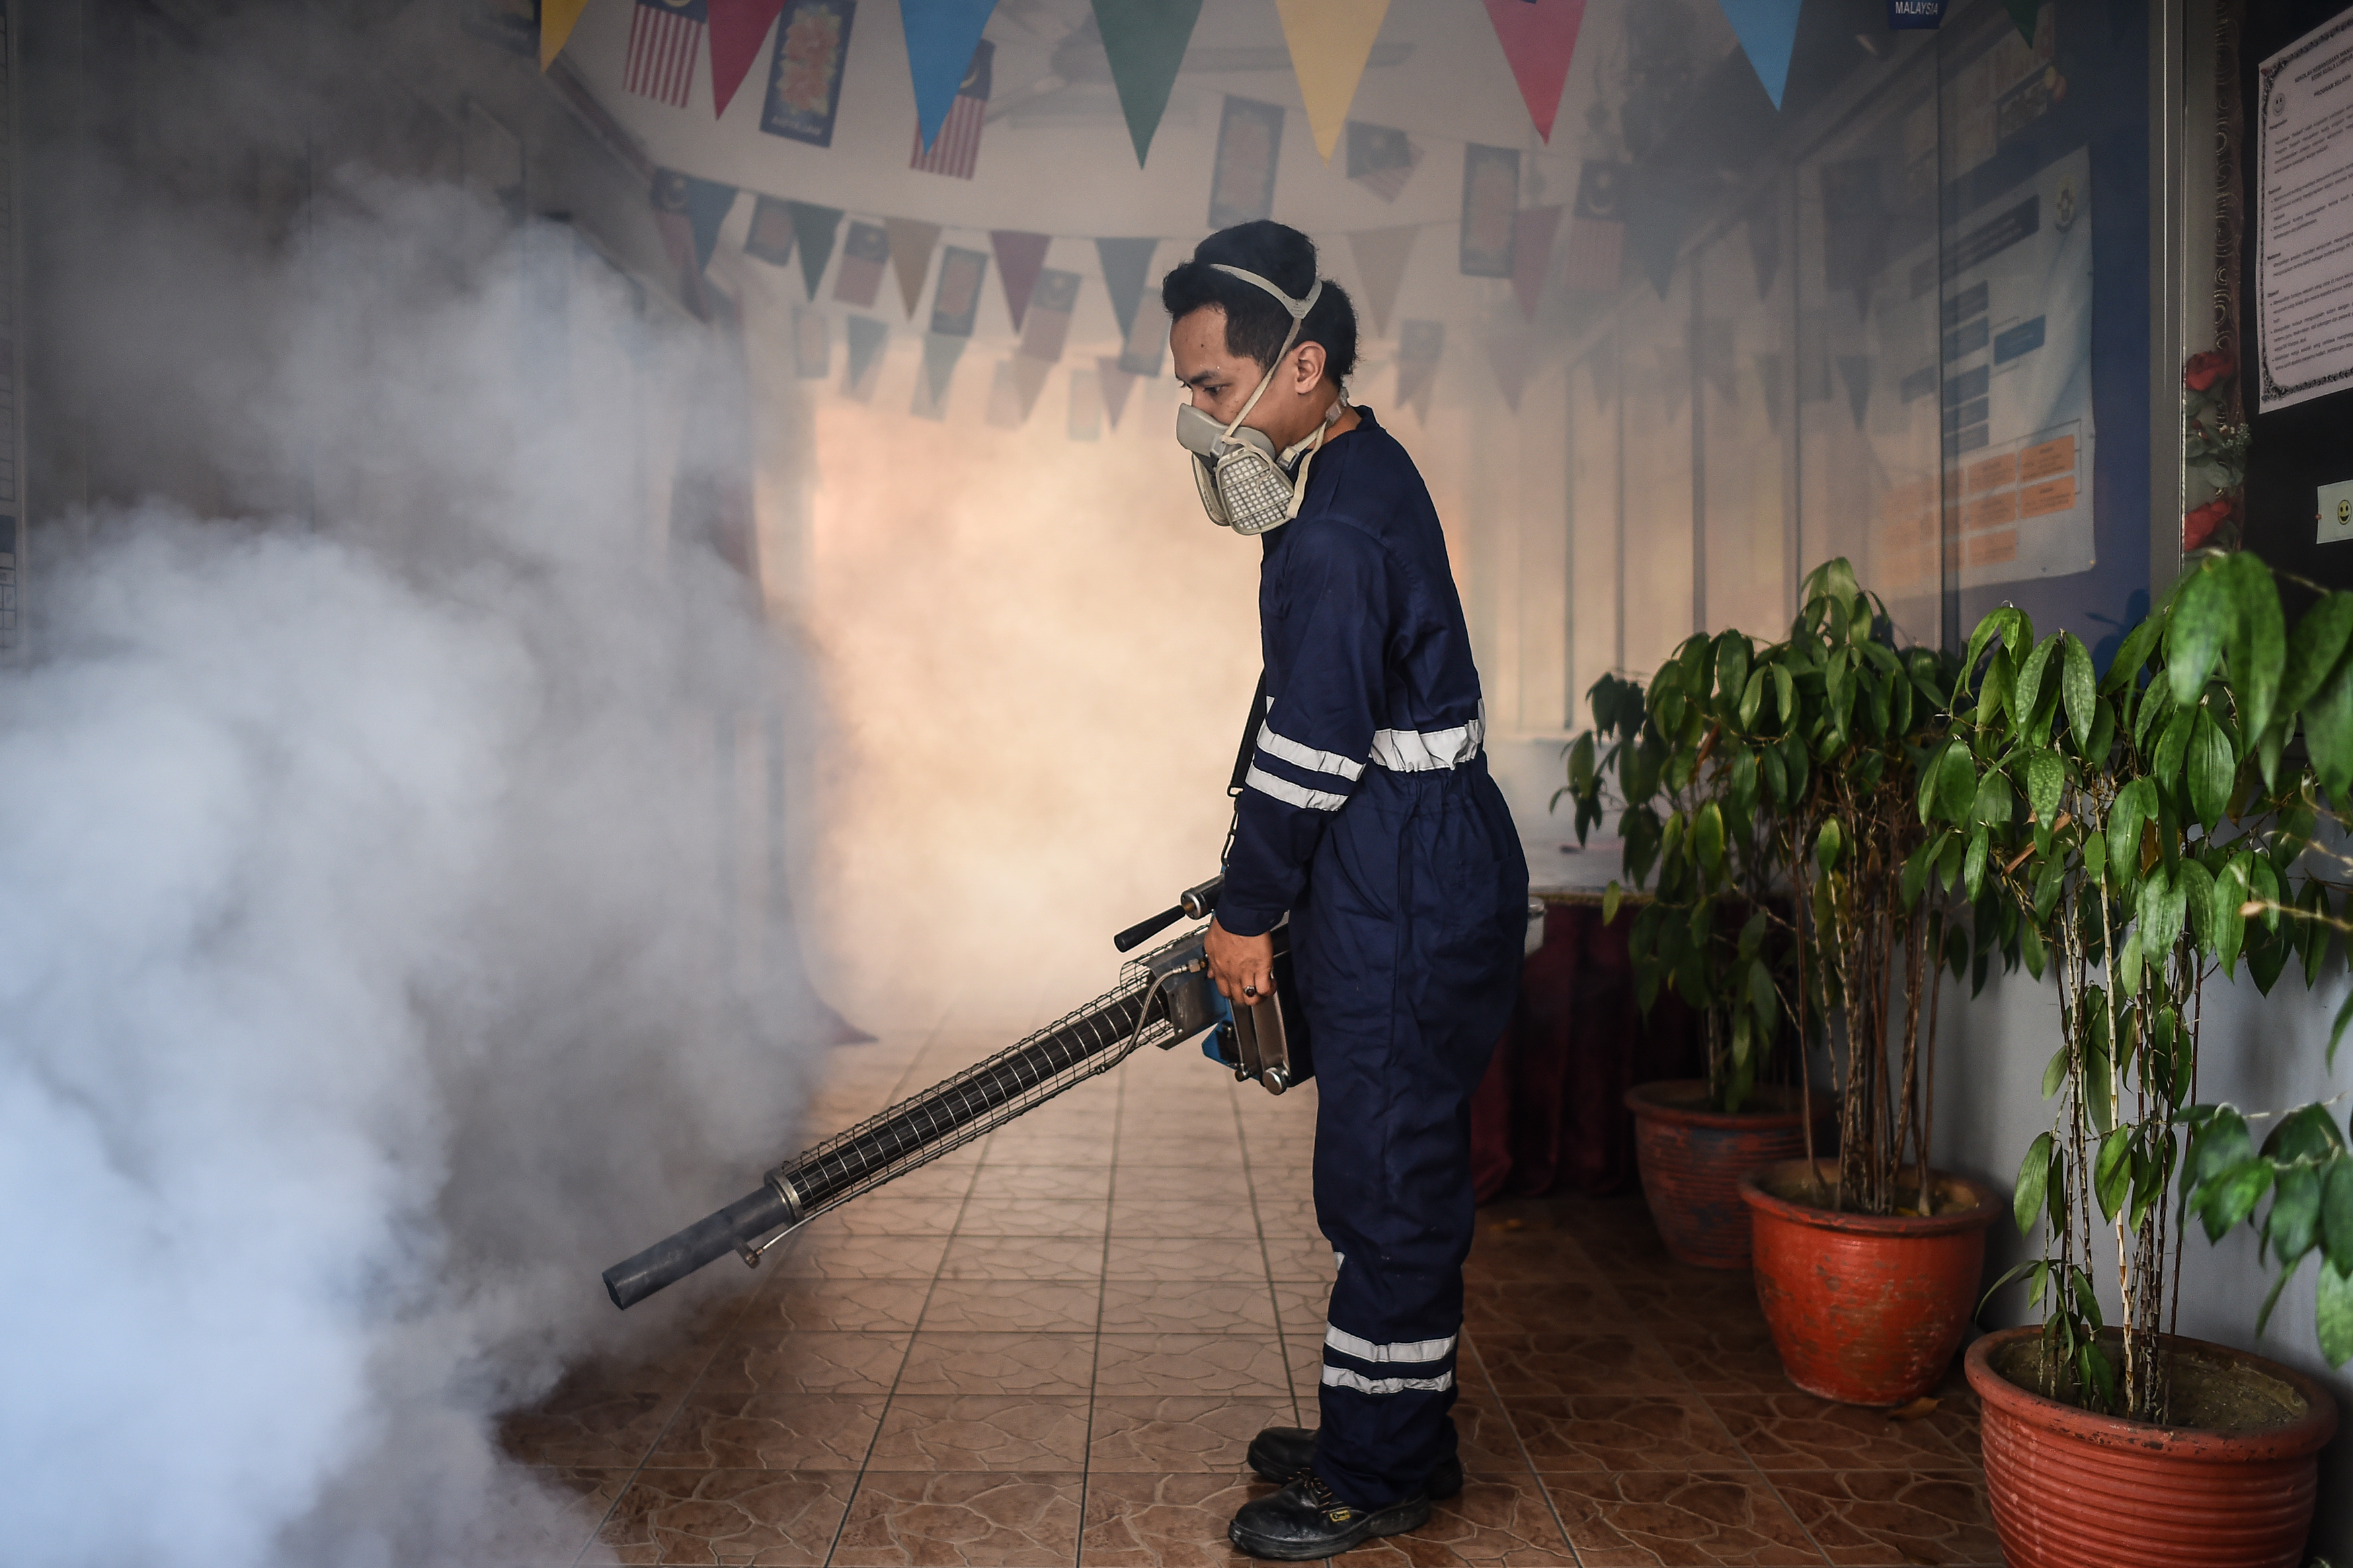 A pest control worker fumigates a school corridor on the eve of the annual national Primary School Evaluation Test in Kuala Lumpur on September 4, 2016.  Malaysia reported its first locally transmitted Zika case on September 3, a 61-year-old man who has died of heart-related complications, the government said. / AFP PHOTO / MOHD RASFAN